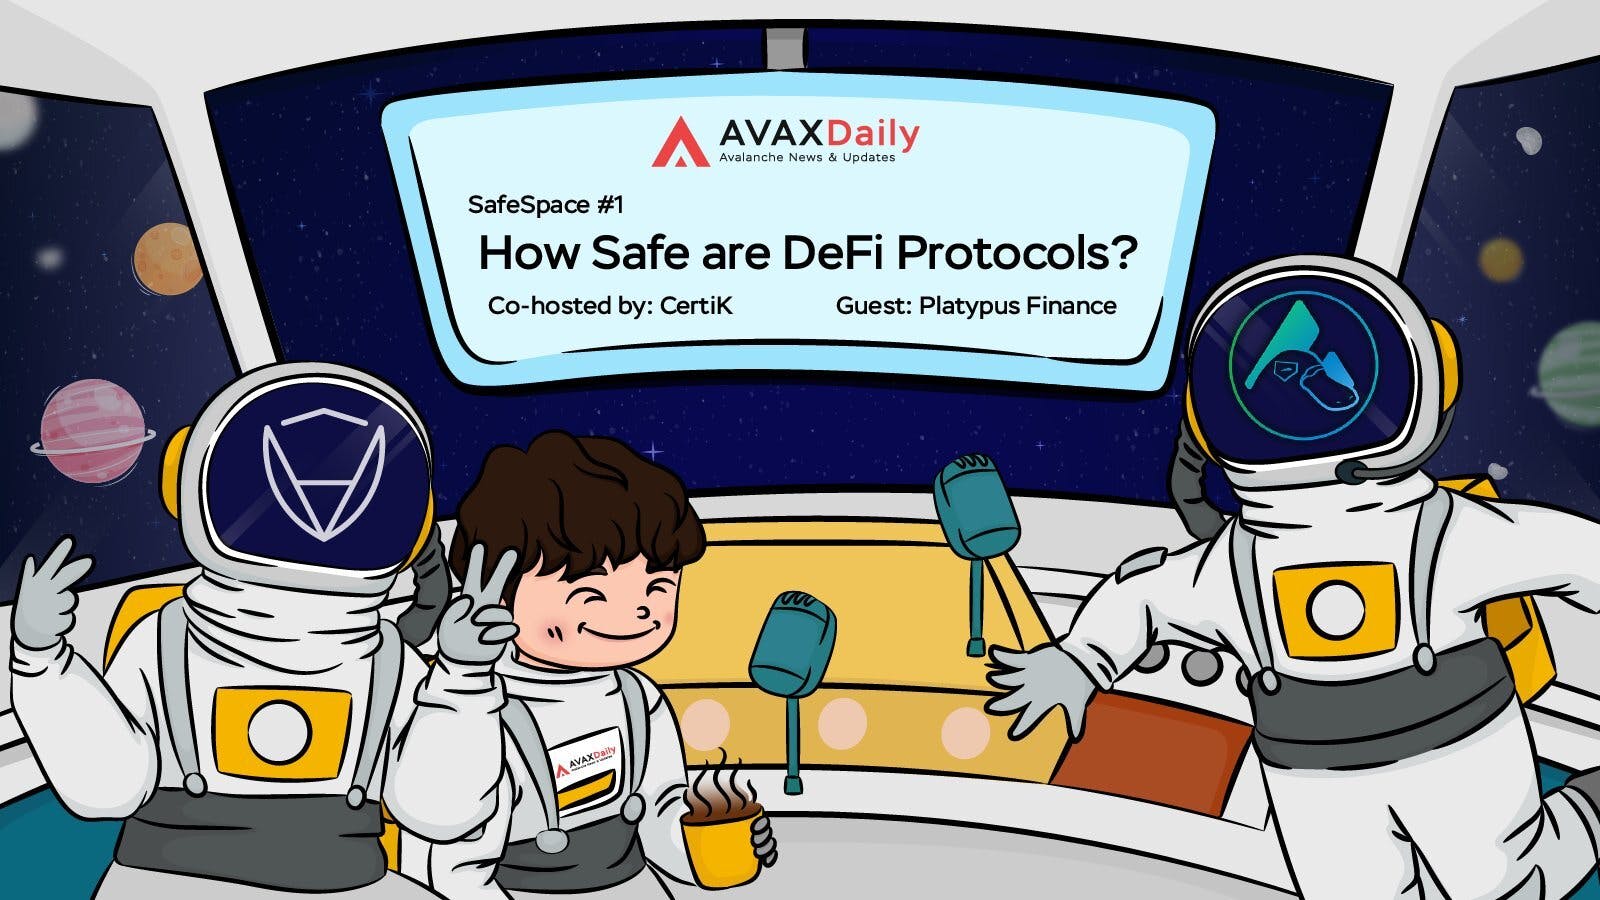 AVAX Daily & CertiK | How Safe are DeFi Protocols | Listen & Learn -  Twitter Spaces